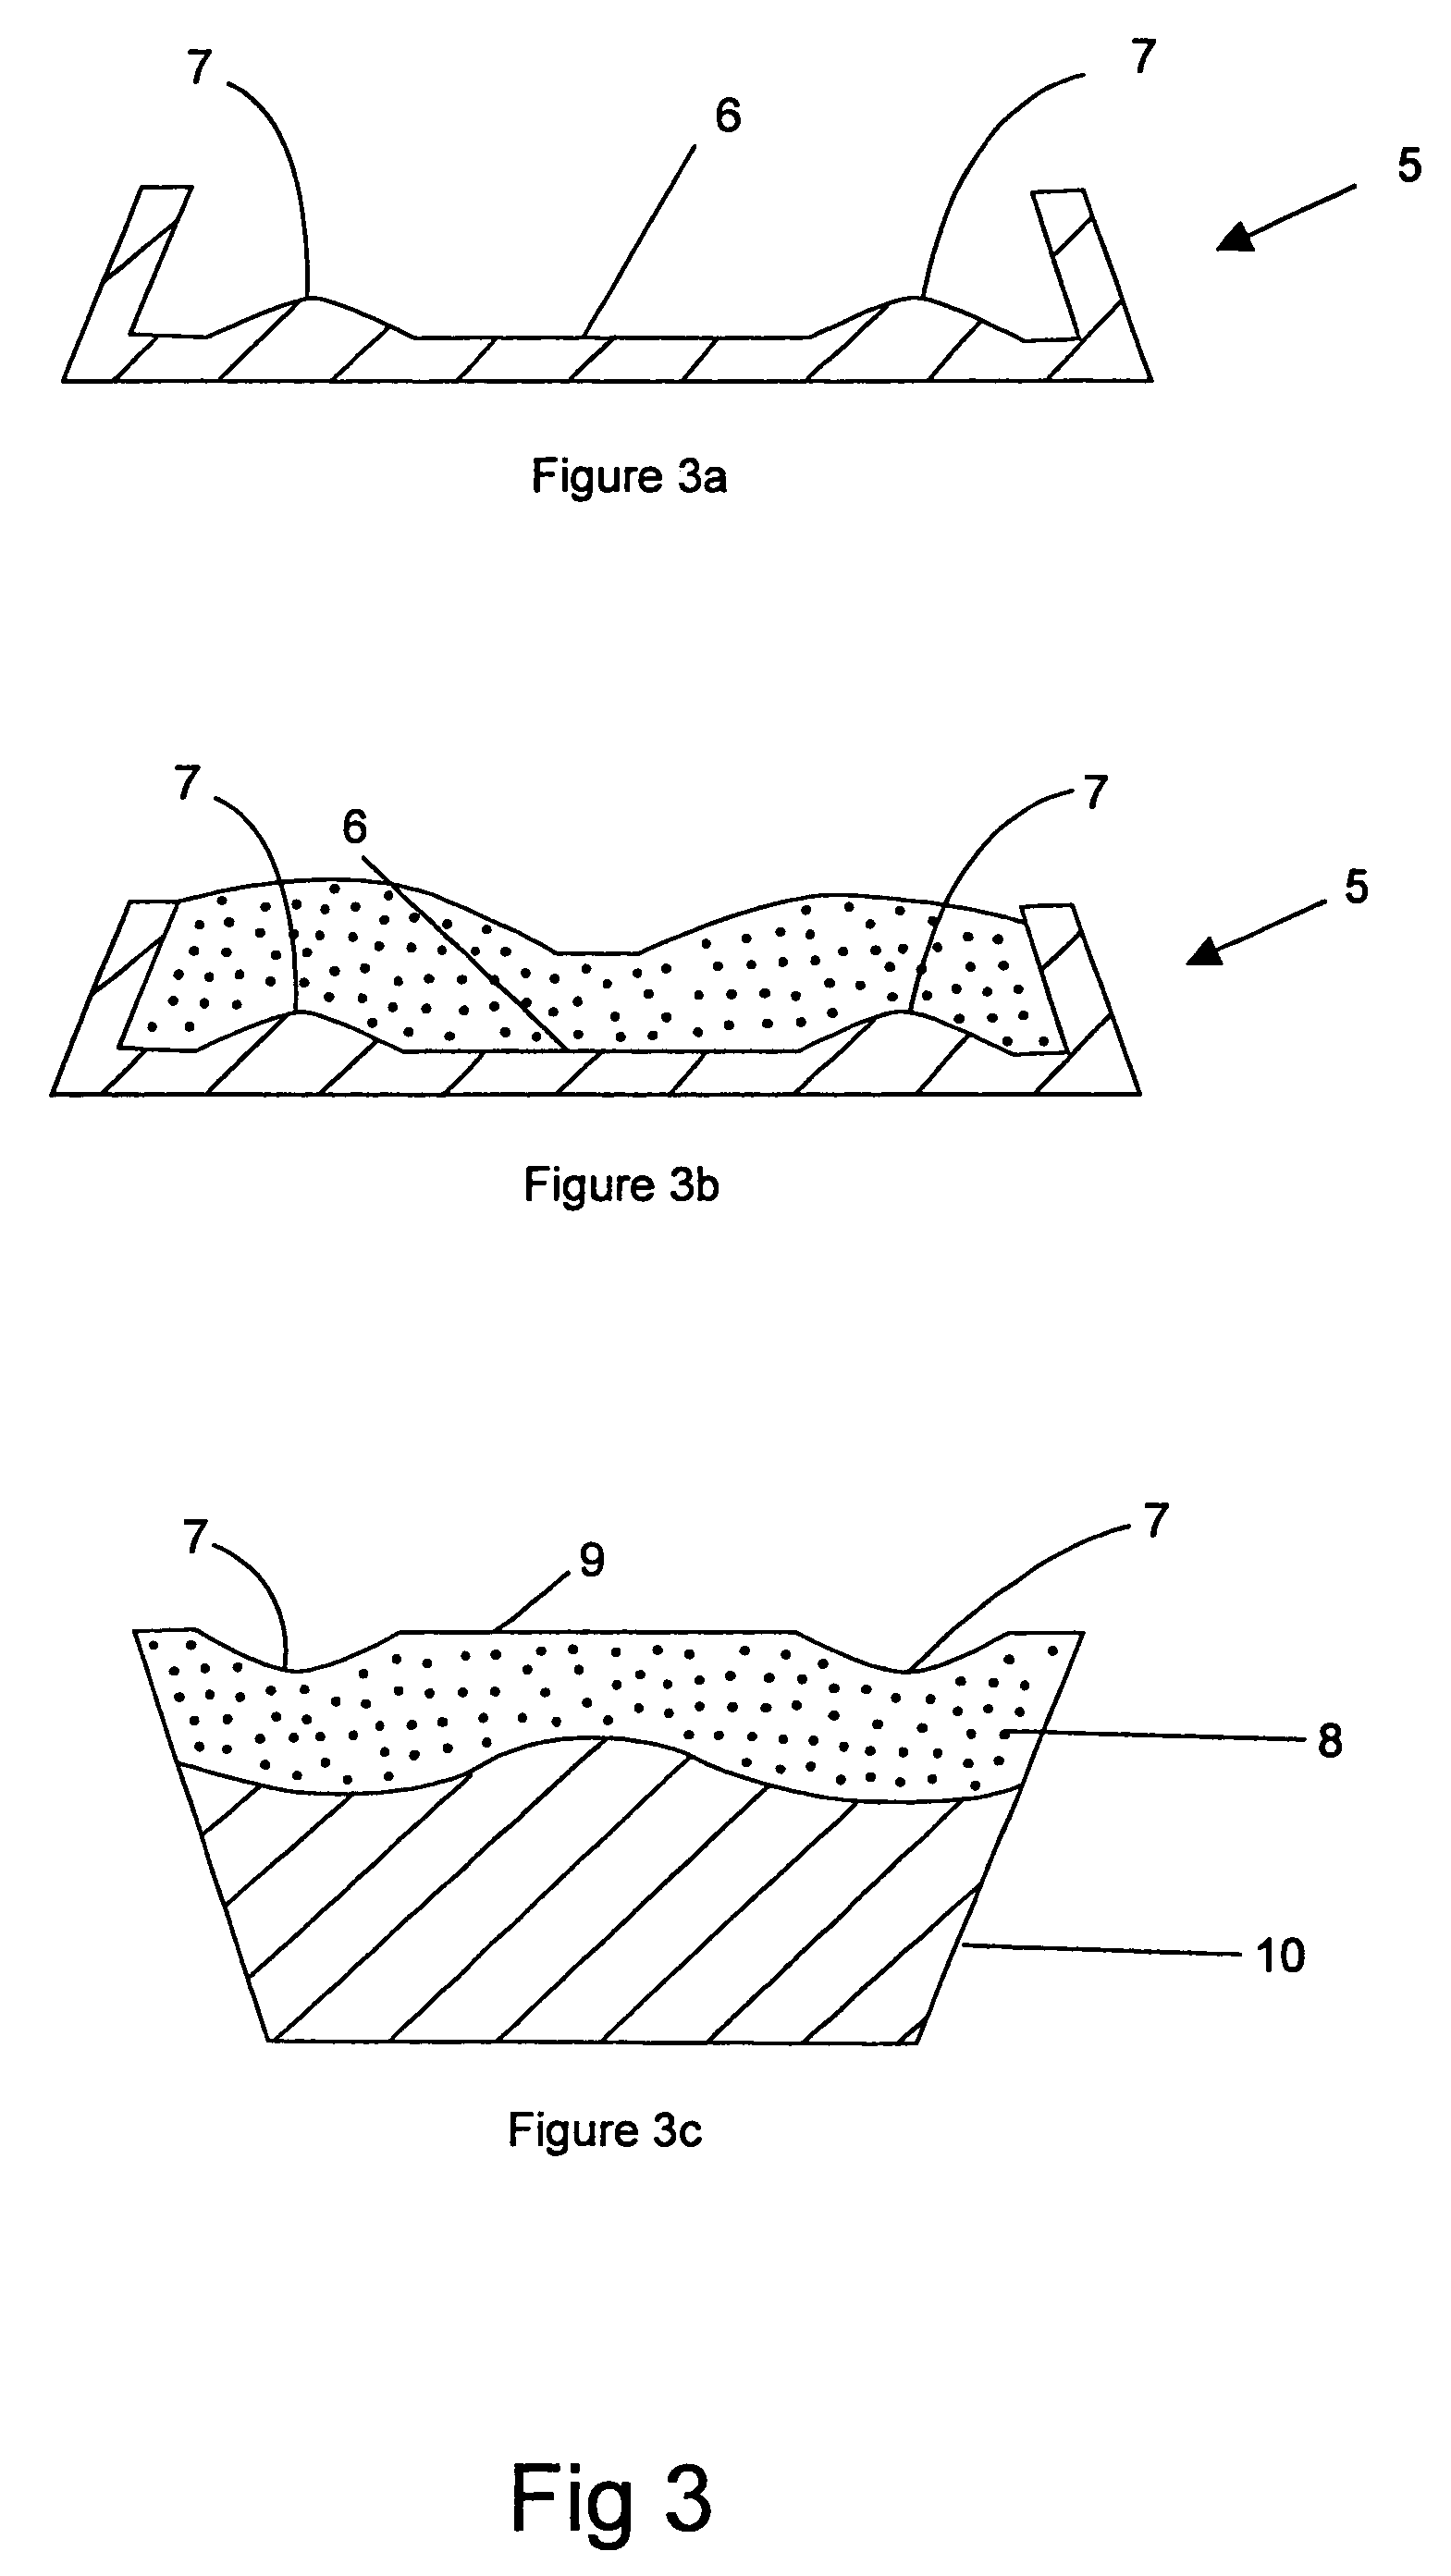 Cast diamond tools and formation thereof by chemical vapor deposition